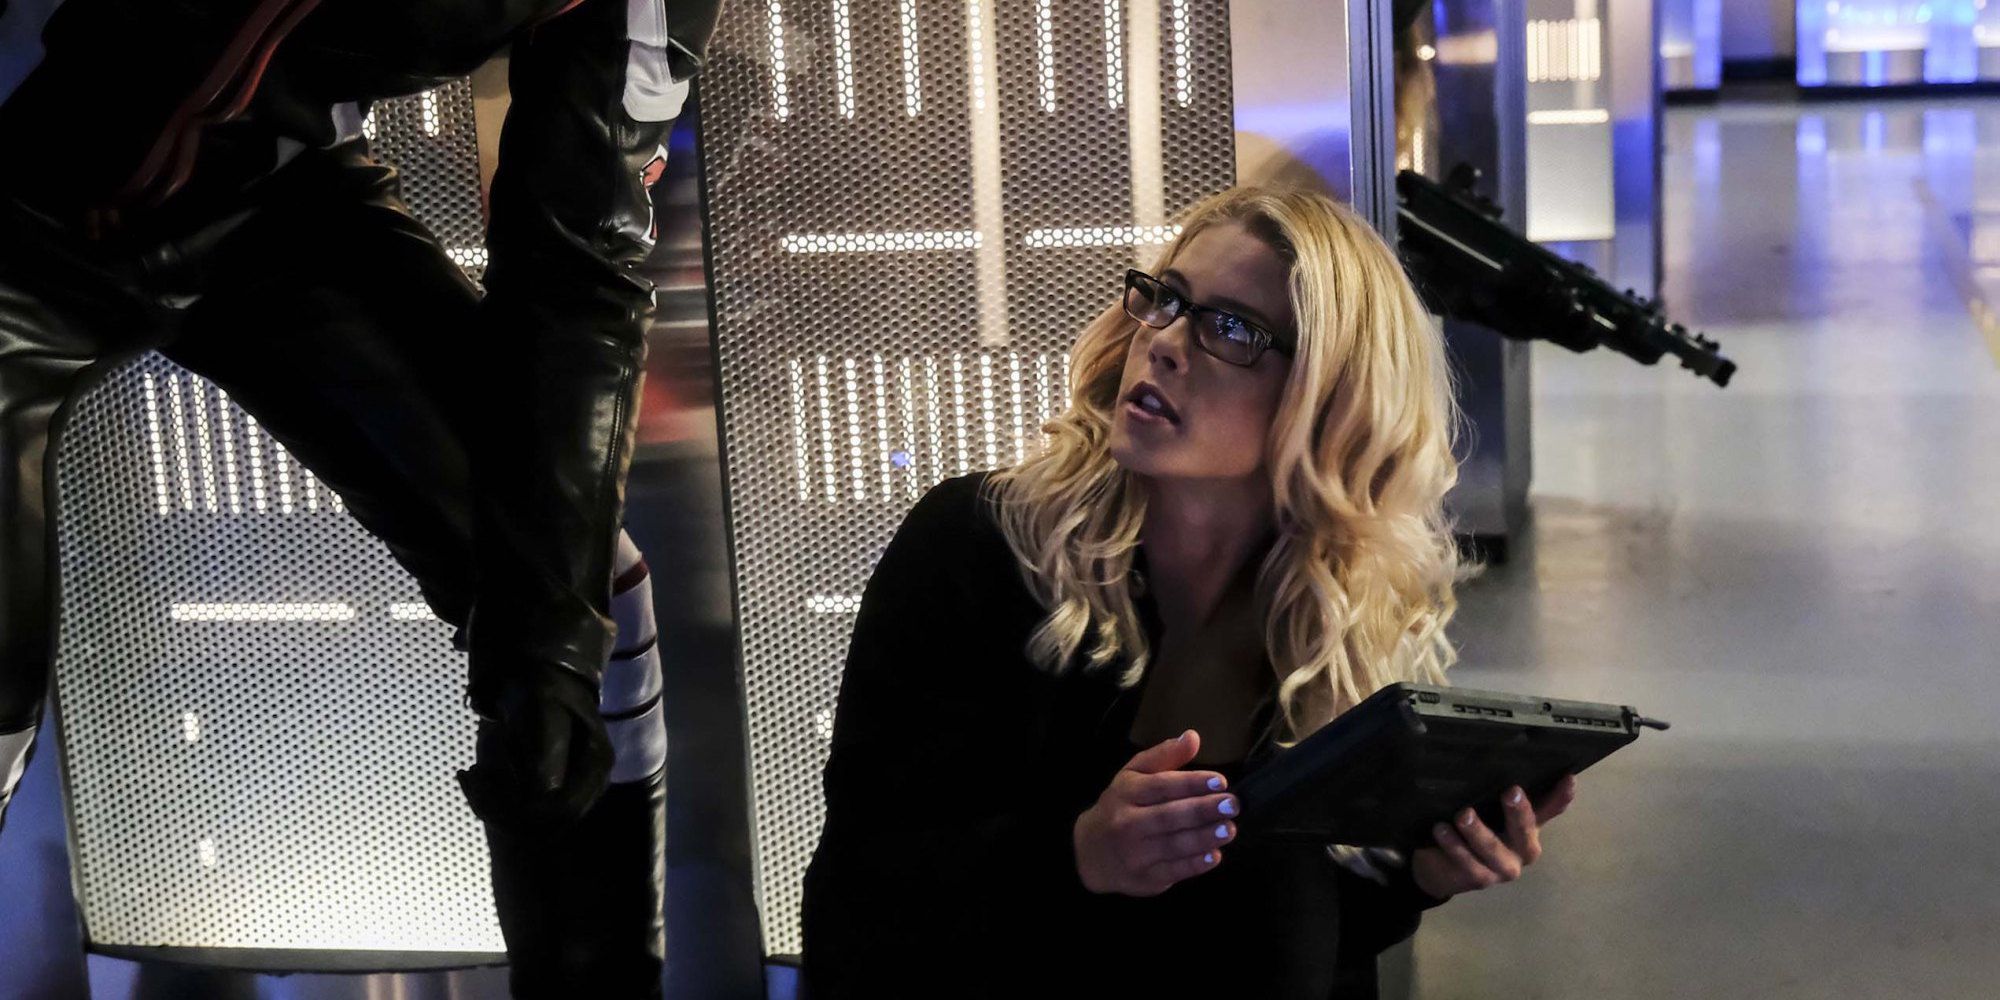 Felicity talking to Oliver in Arrow.